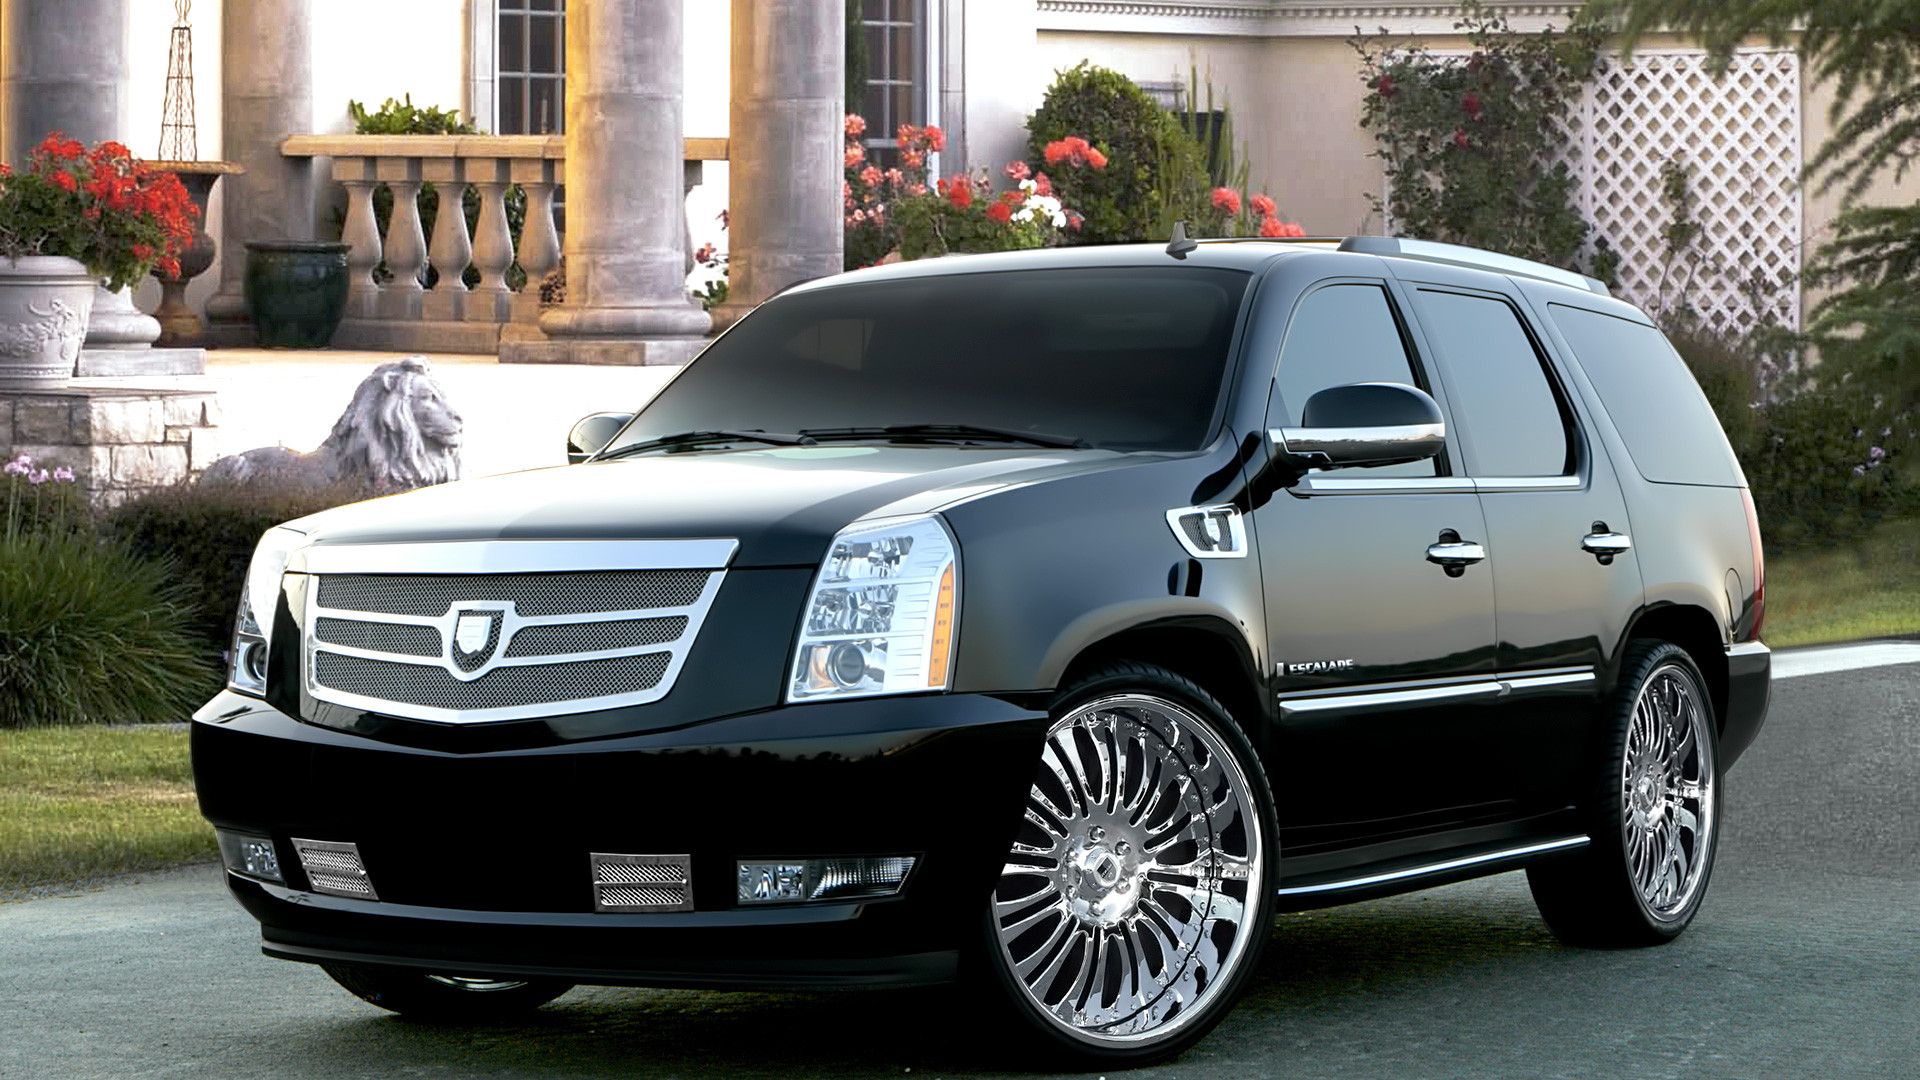 Cadillac Escalade Cts V Wallpaper For iPhone